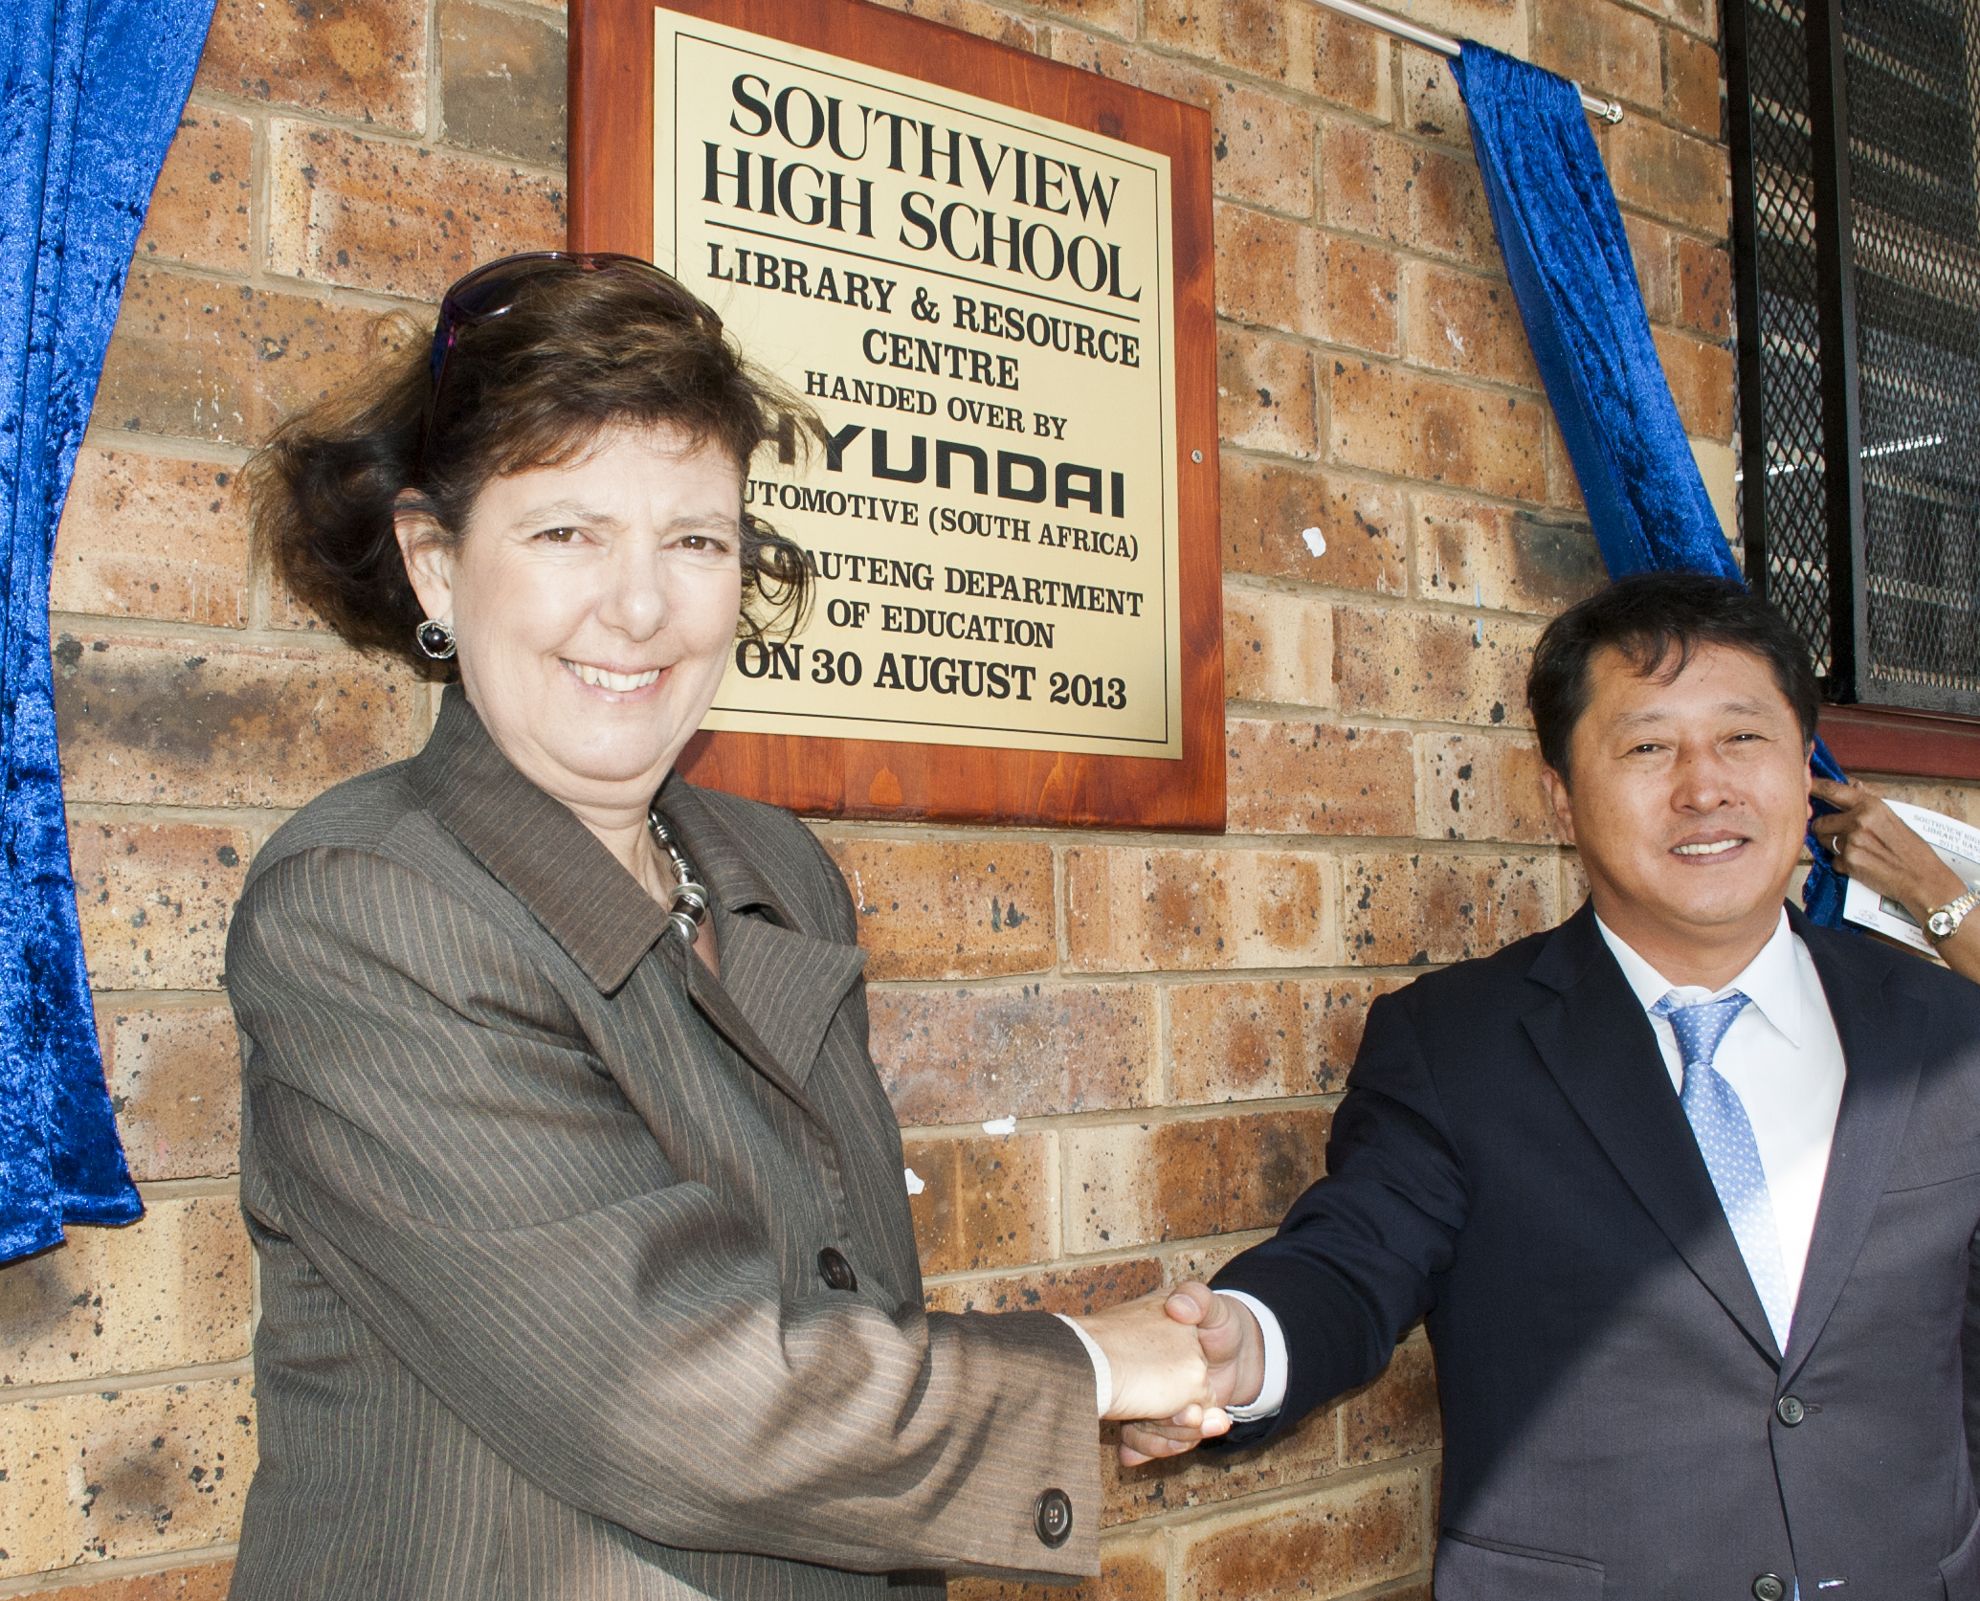 Southview High School Lenasia, gets Library from Hyundai South Africa